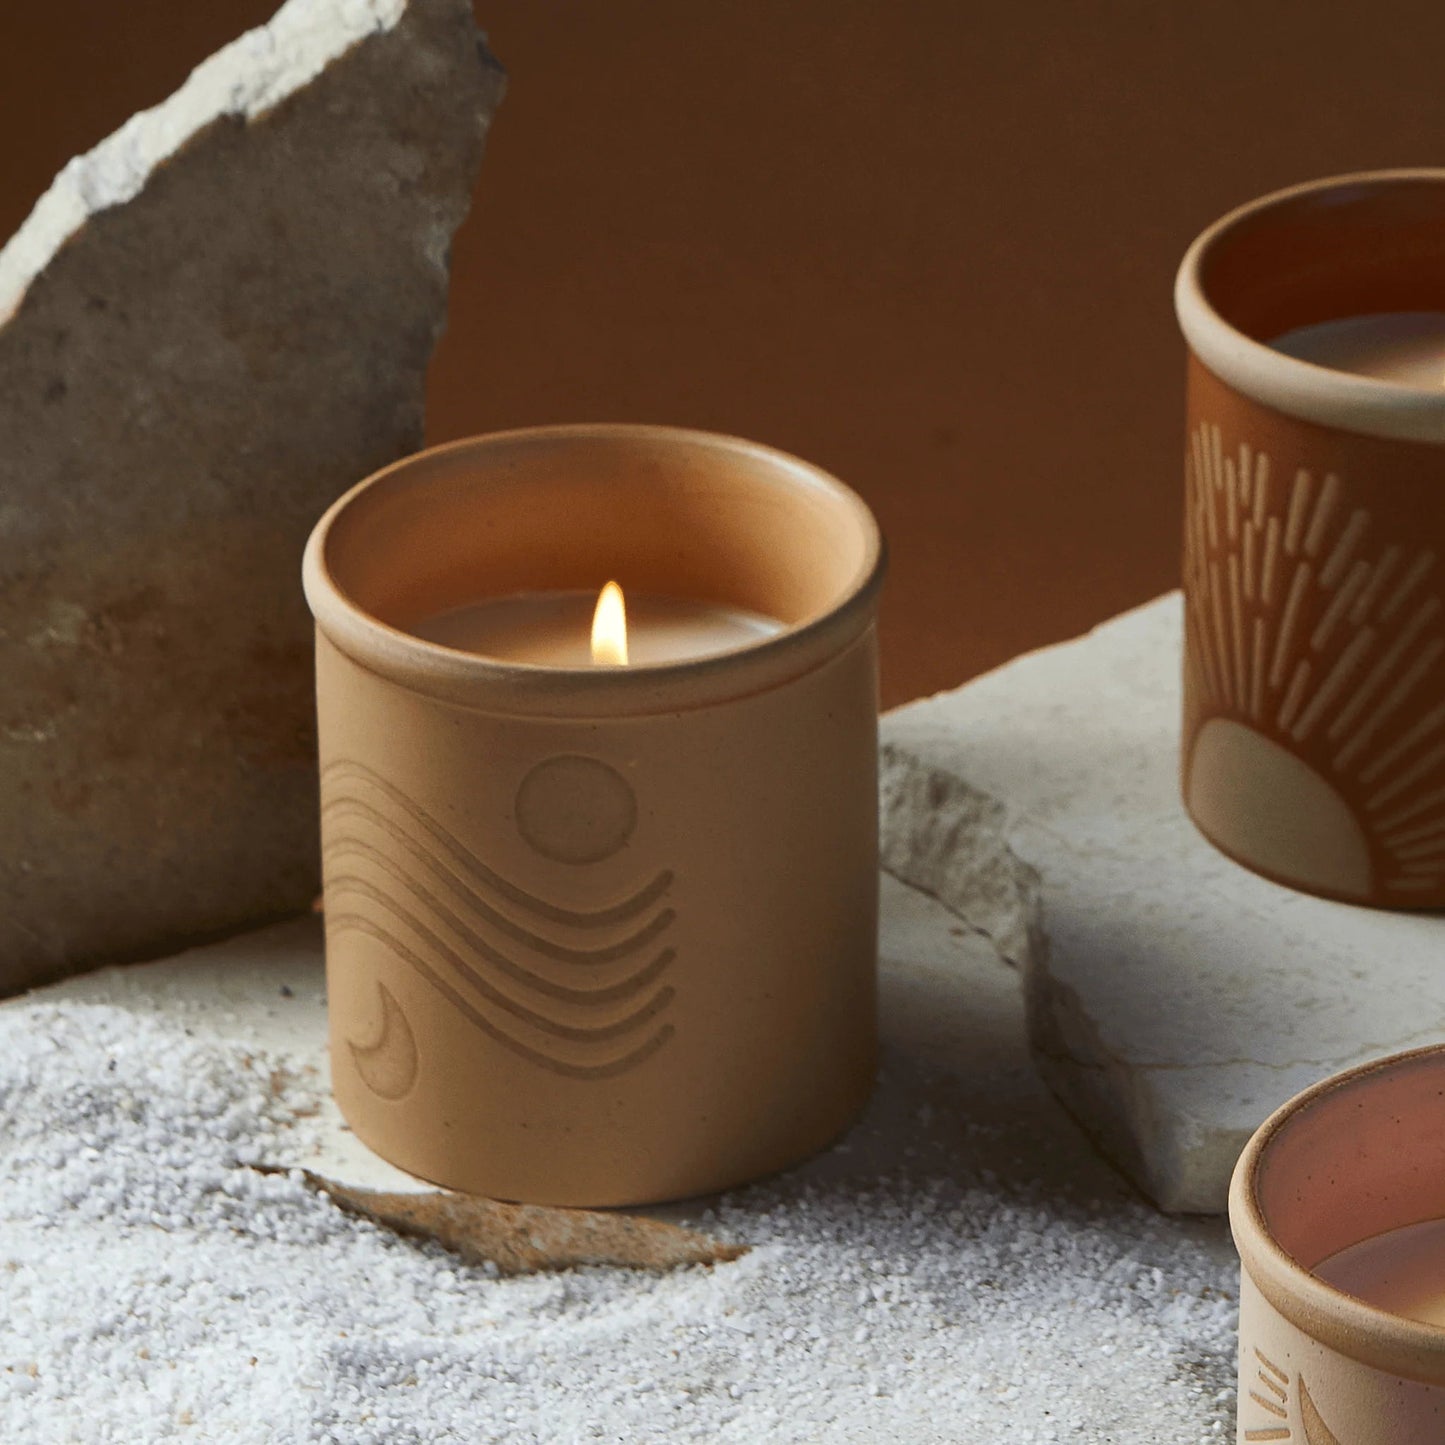 Dune Ceramic Candle - The Riviera Towel Company